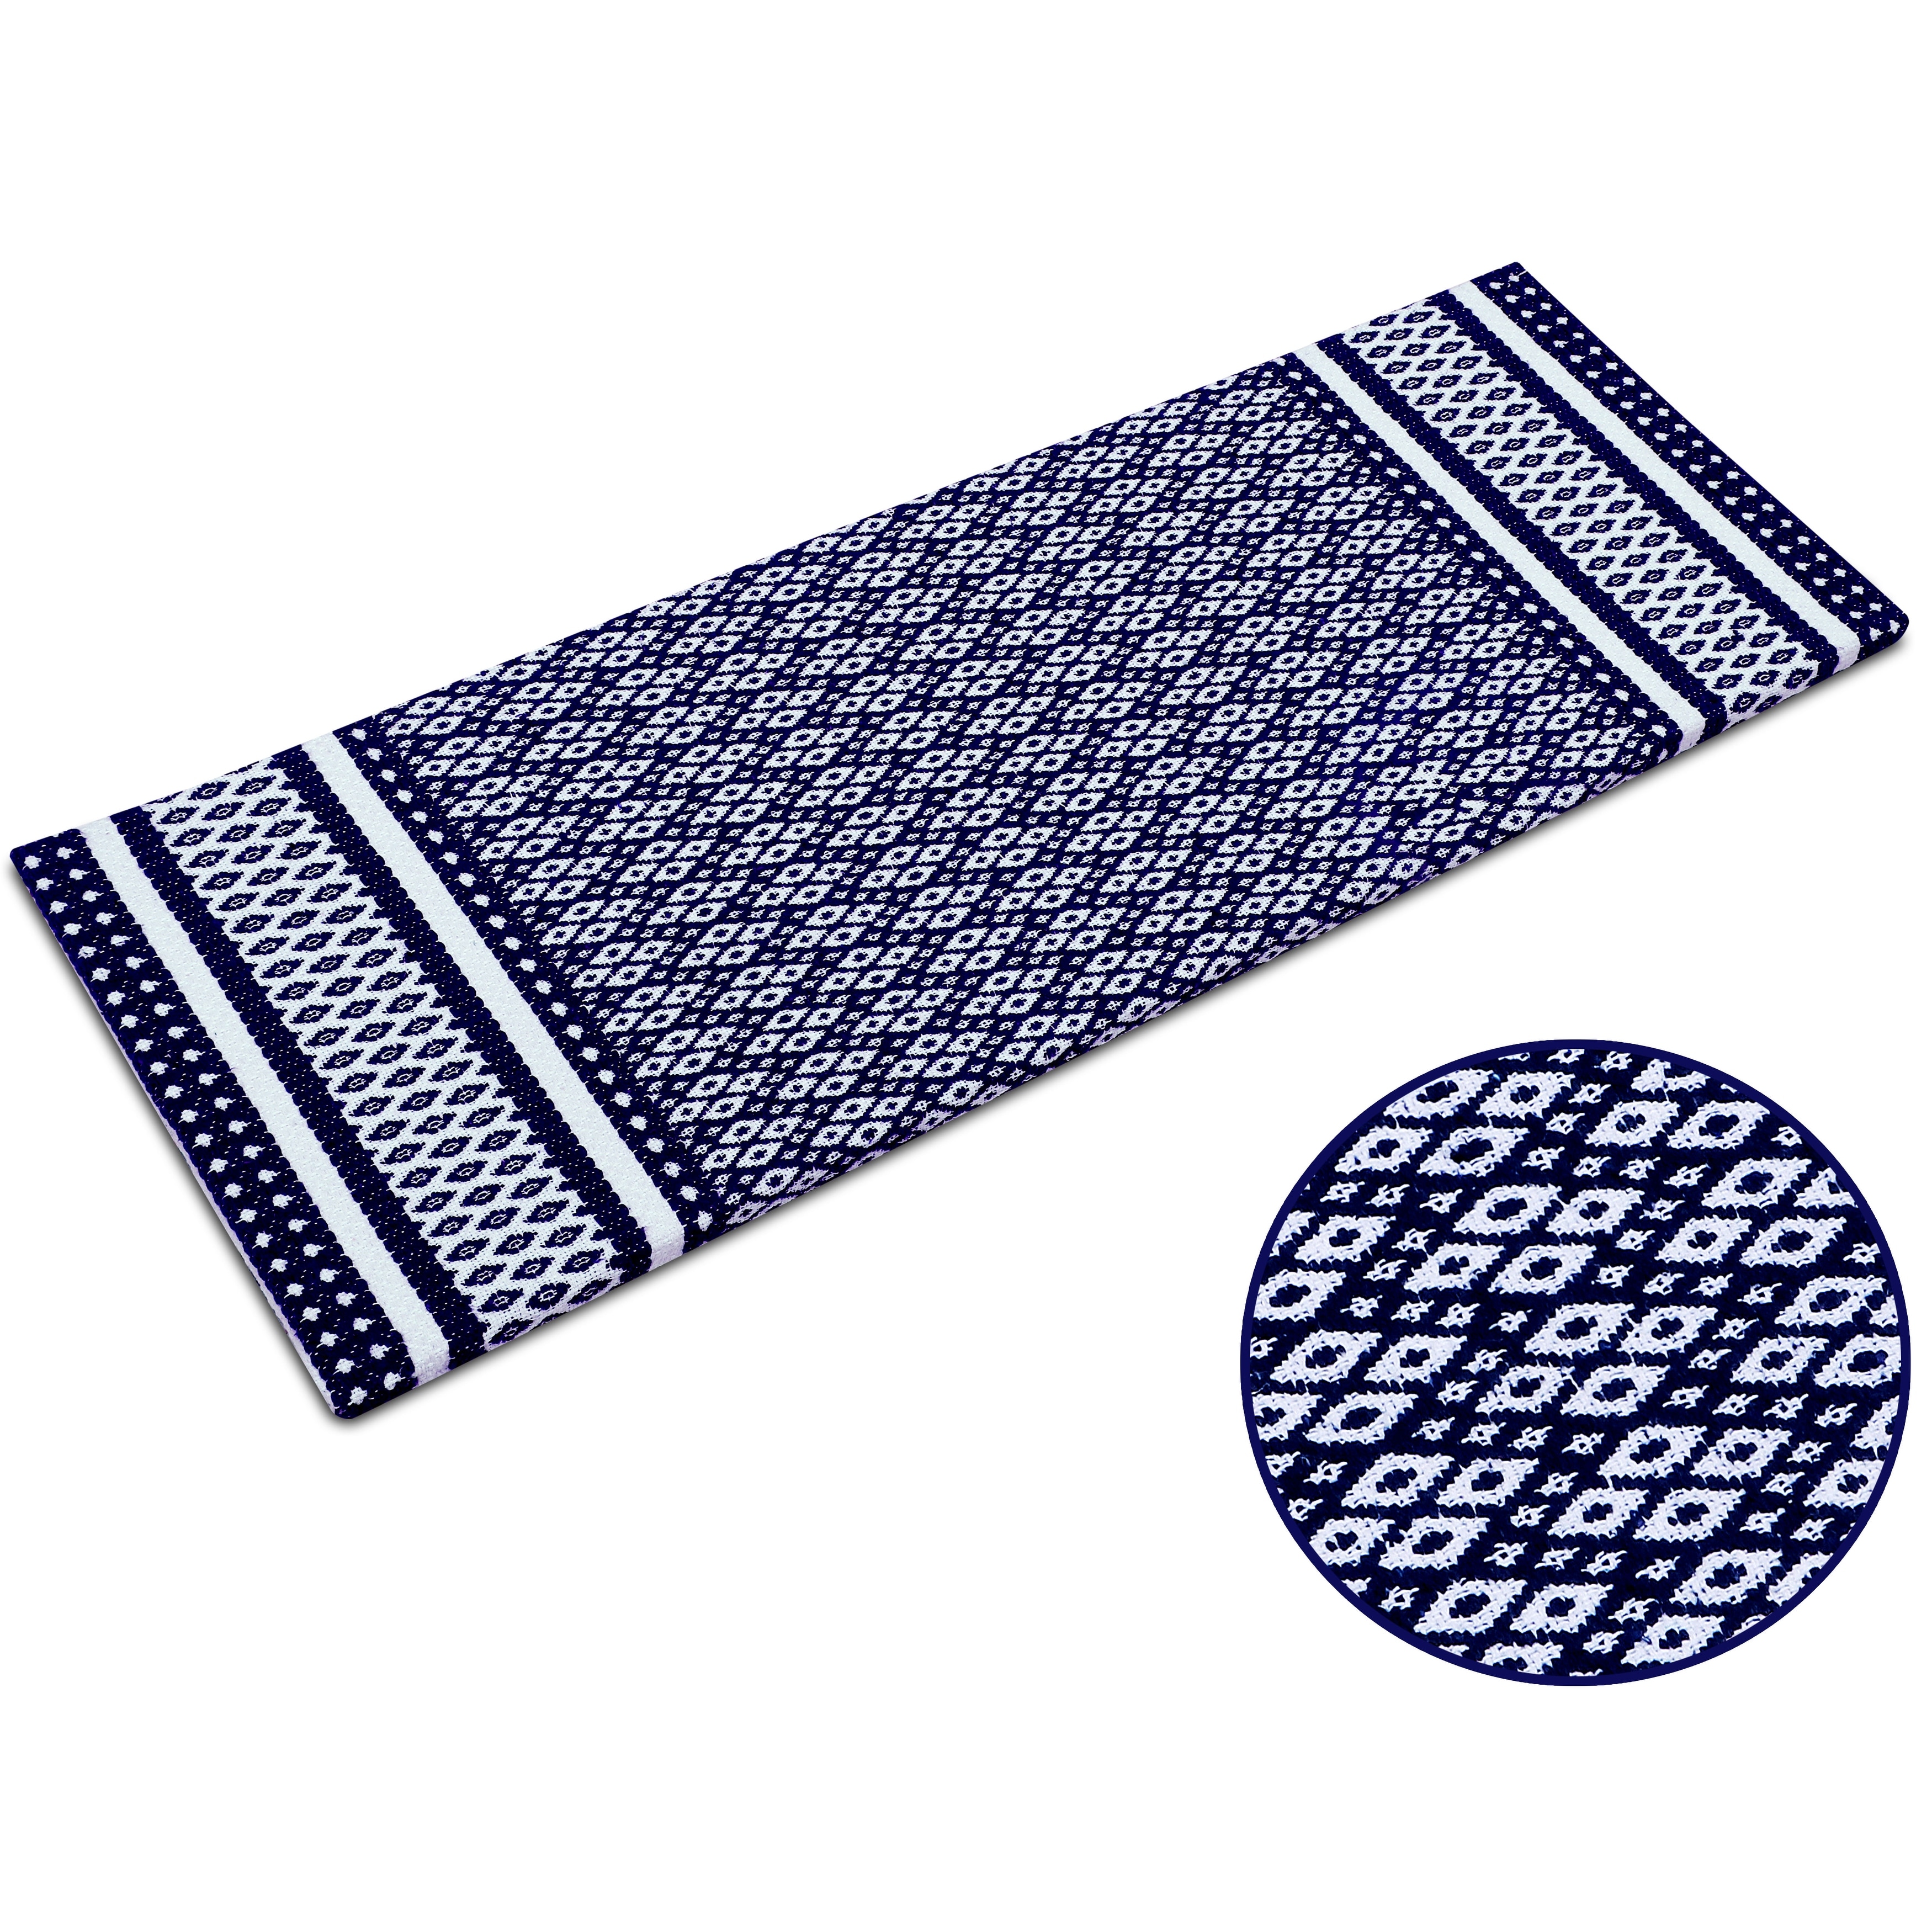 https://ak1.ostkcdn.com/images/products/is/images/direct/7d7564eaf3bc64068f75d6f2e7be7e64ba09e3c1/Kitchen-Runner-Rug--Mat-Cushioned-Cotton-Hand-Woven-Anti-Fatigue-Mat-Kitchen-Bathroom-Bed-side-18x48%27%27.jpg